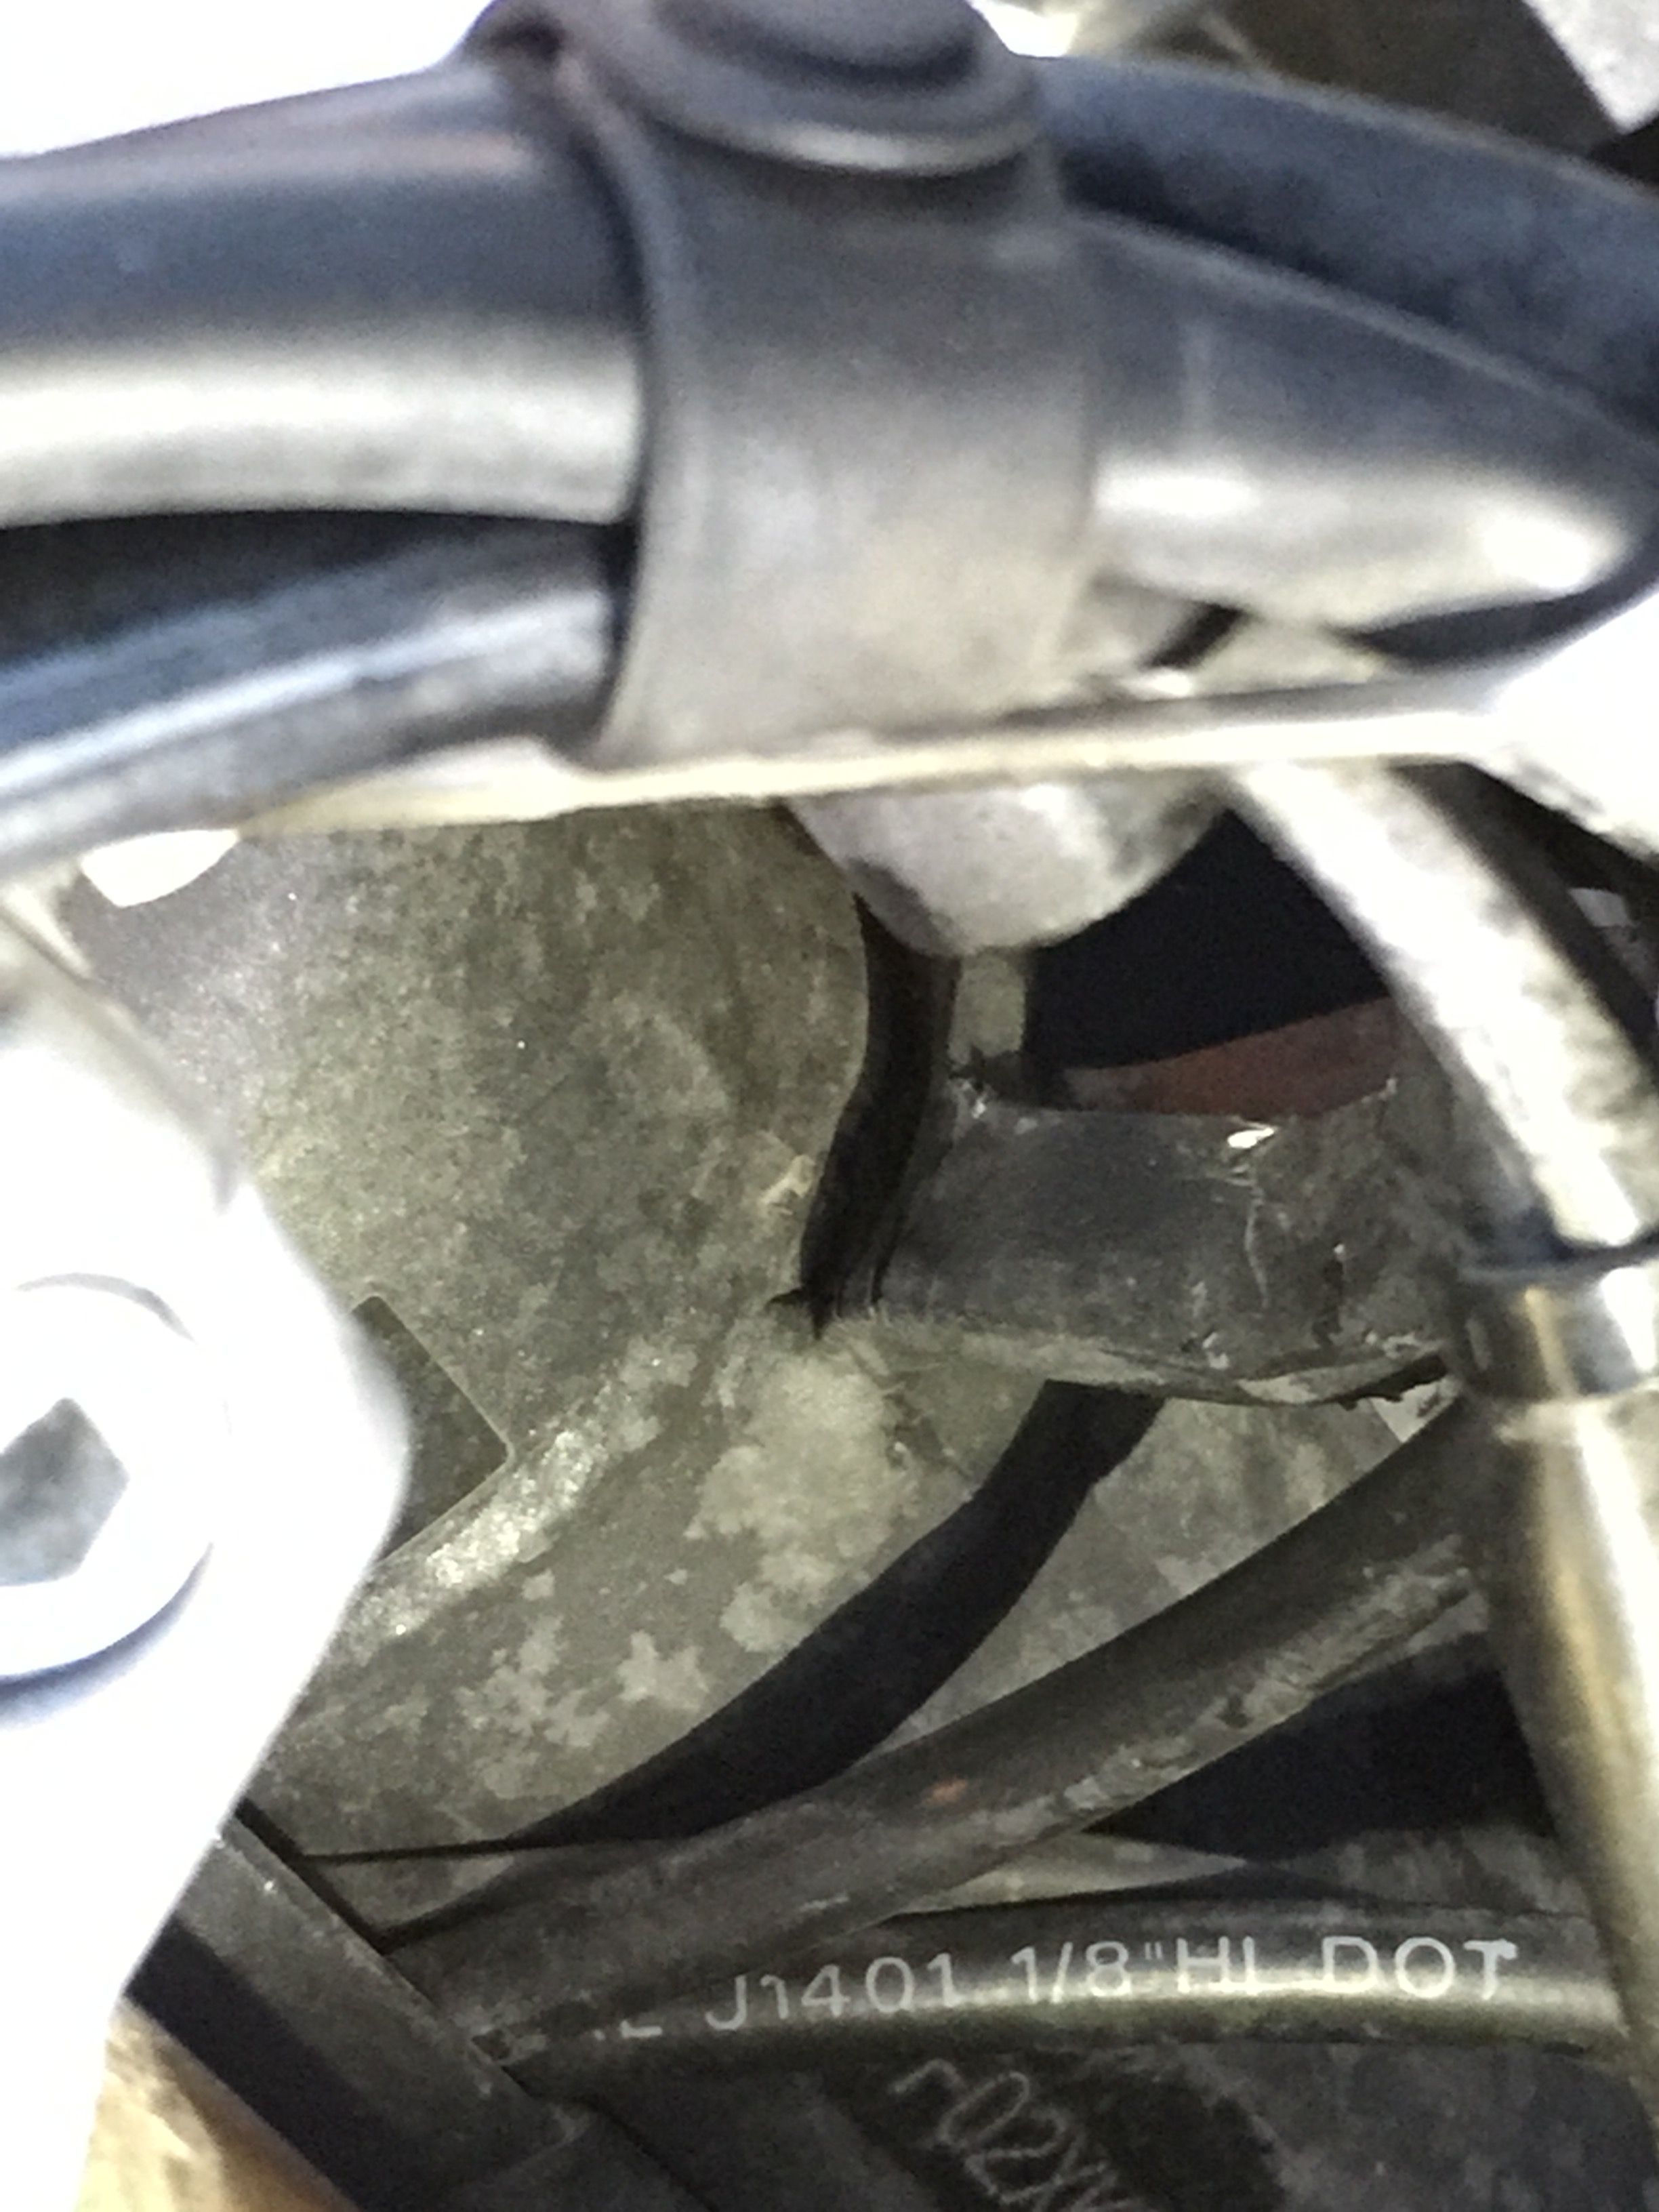 Cracked mystery bracket on the steering column of my Triumph Tiger 1200